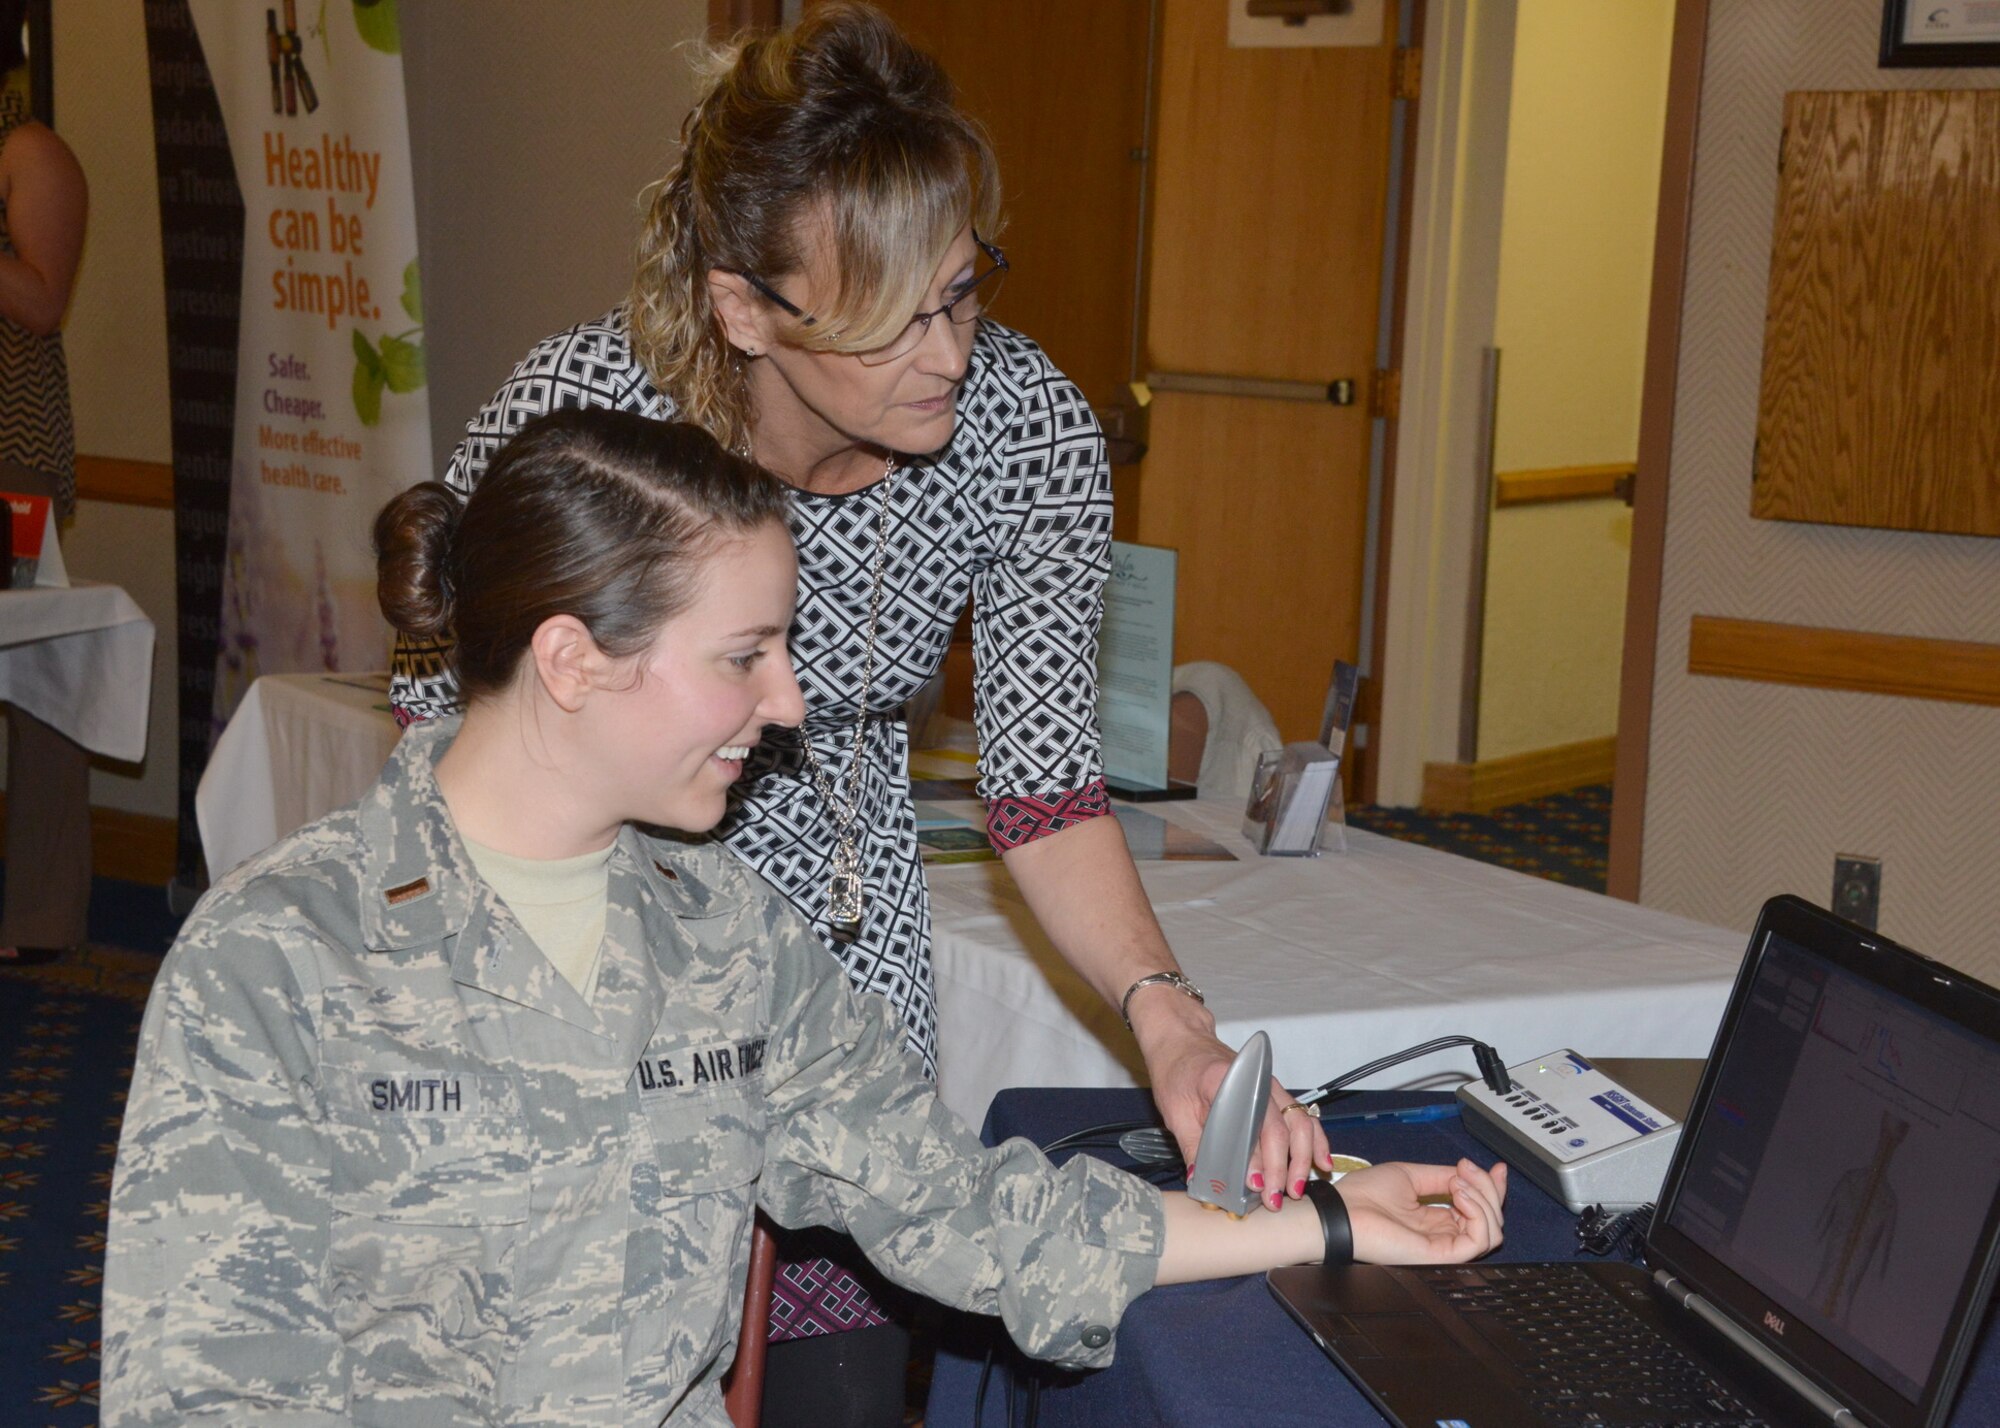 A lieutenant gets here blood pressure checked at last year's Wellness Expo.  This year's Wellness Expo is set for 10 a.m. to 3 p.m. July 28 in the 150th Special Operations Wing main hangar, Building 1043, on Randolph Avenue. It includes about 70 vendors representing on- and off-base health entities and assistance agencies. (Photo by Dennis Carlson)